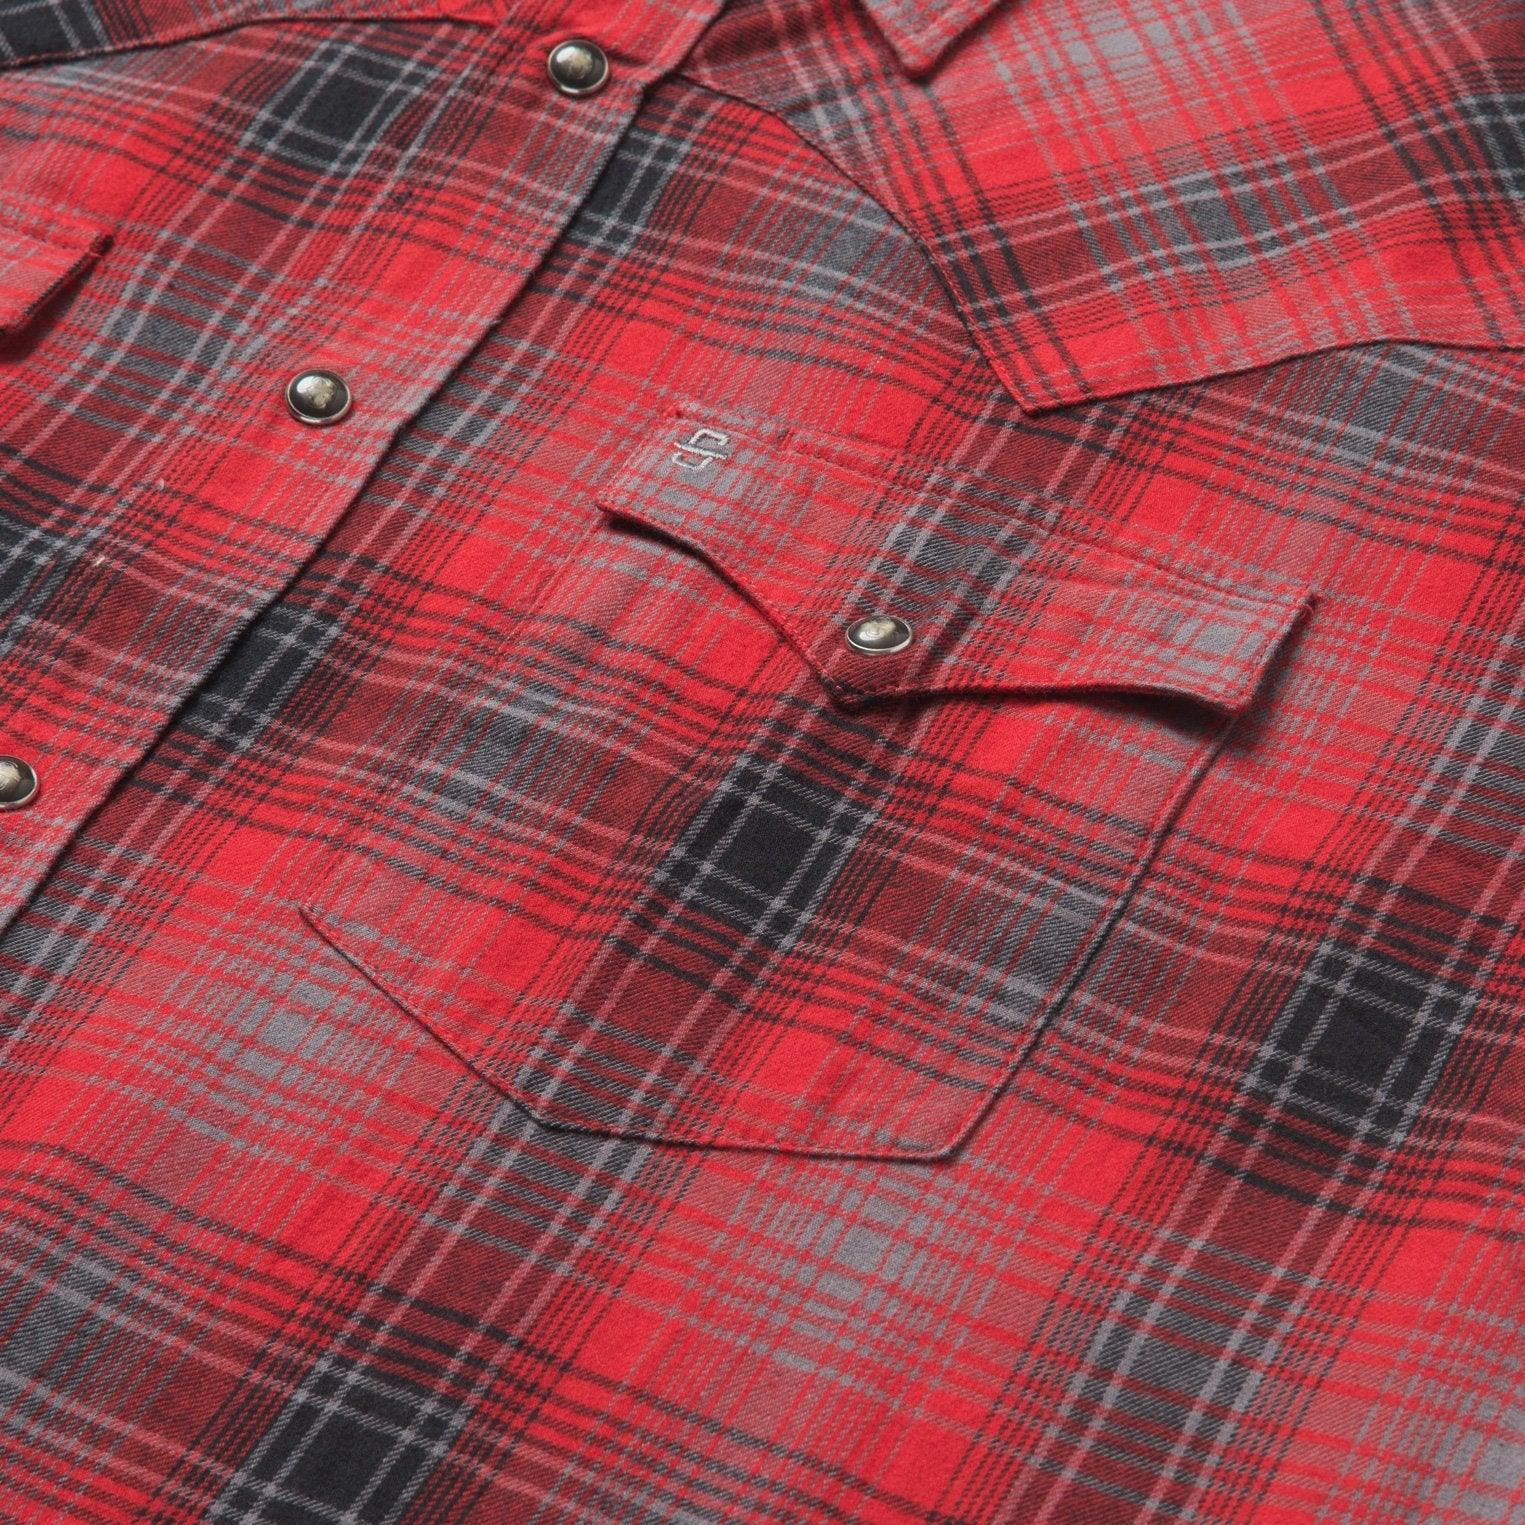 Stetson Classic Flannel Western Shirt in Red Plaid - Flyclothing LLC